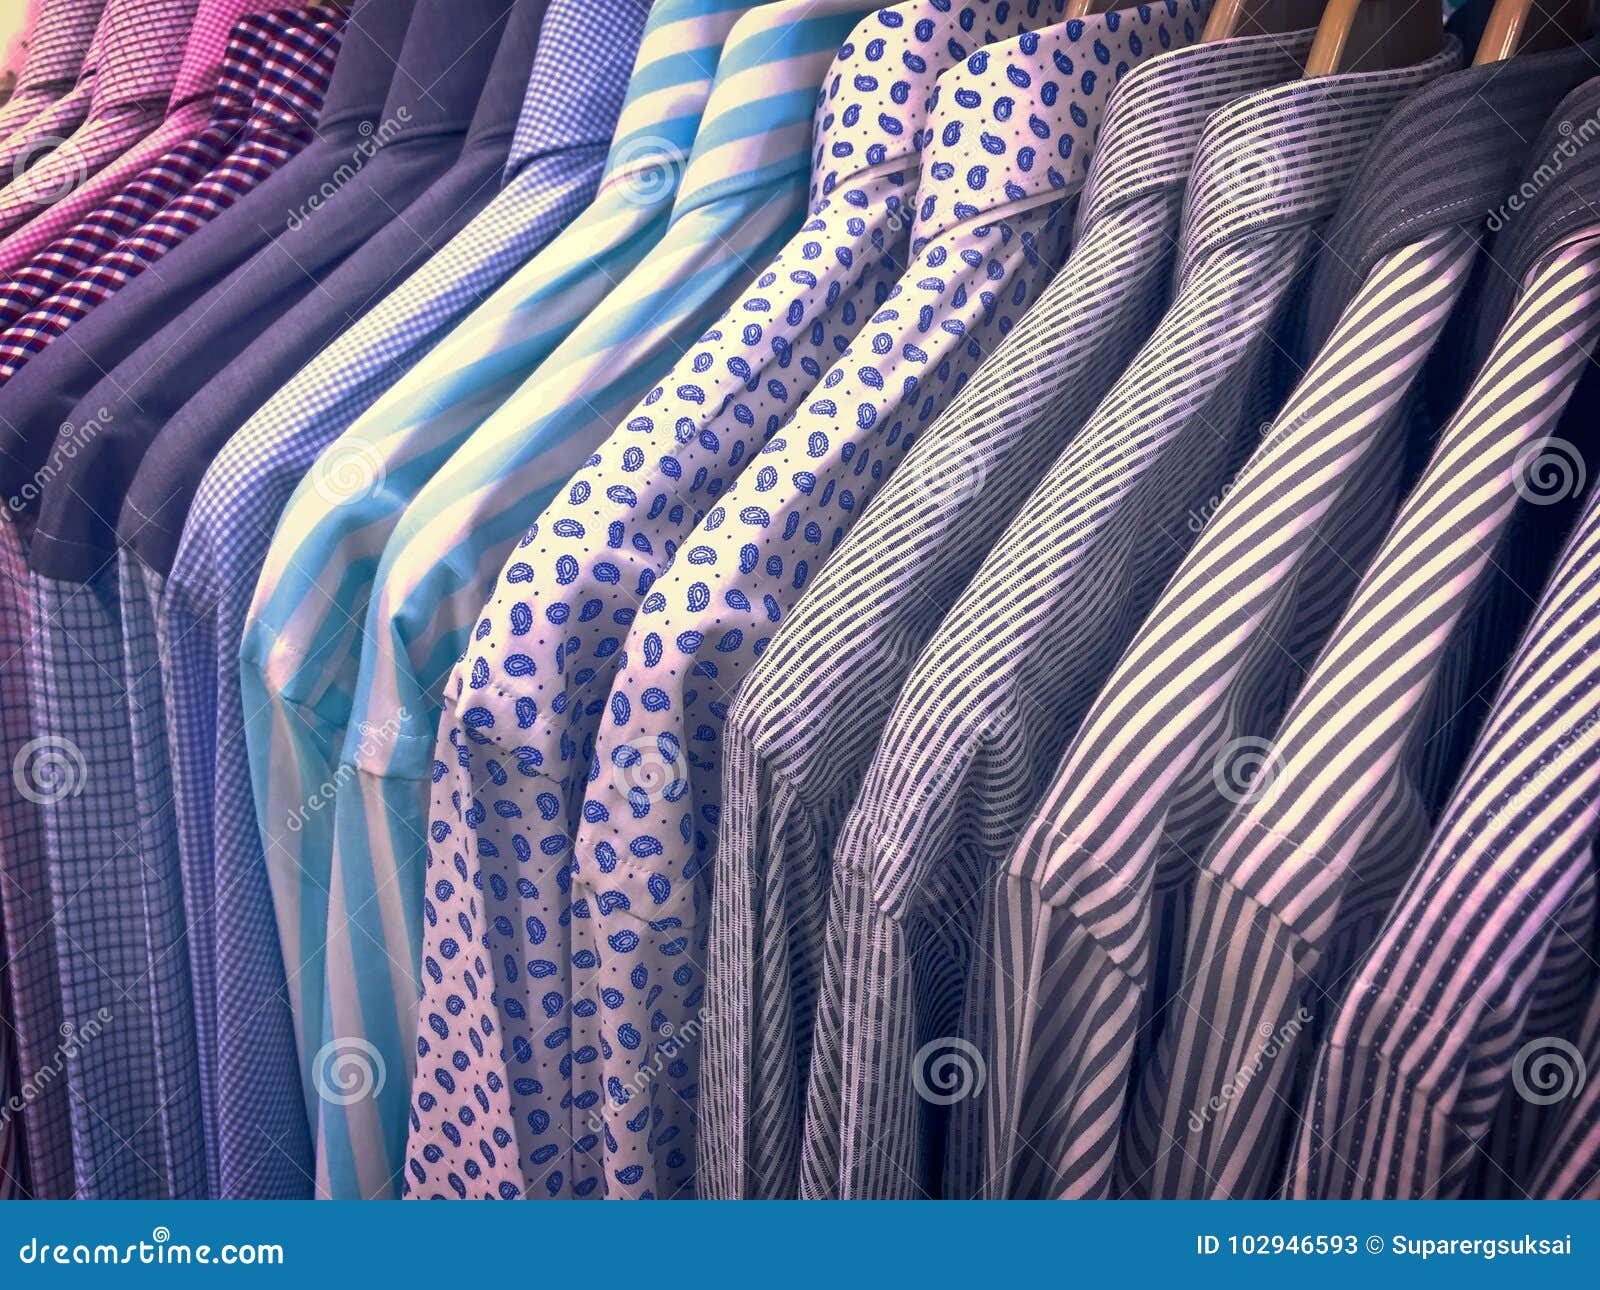 male analogy Receiver Men`s Long Sleeve Patterned Shirts on Rack Stock Image - Image of sleeve,  collection: 102946593